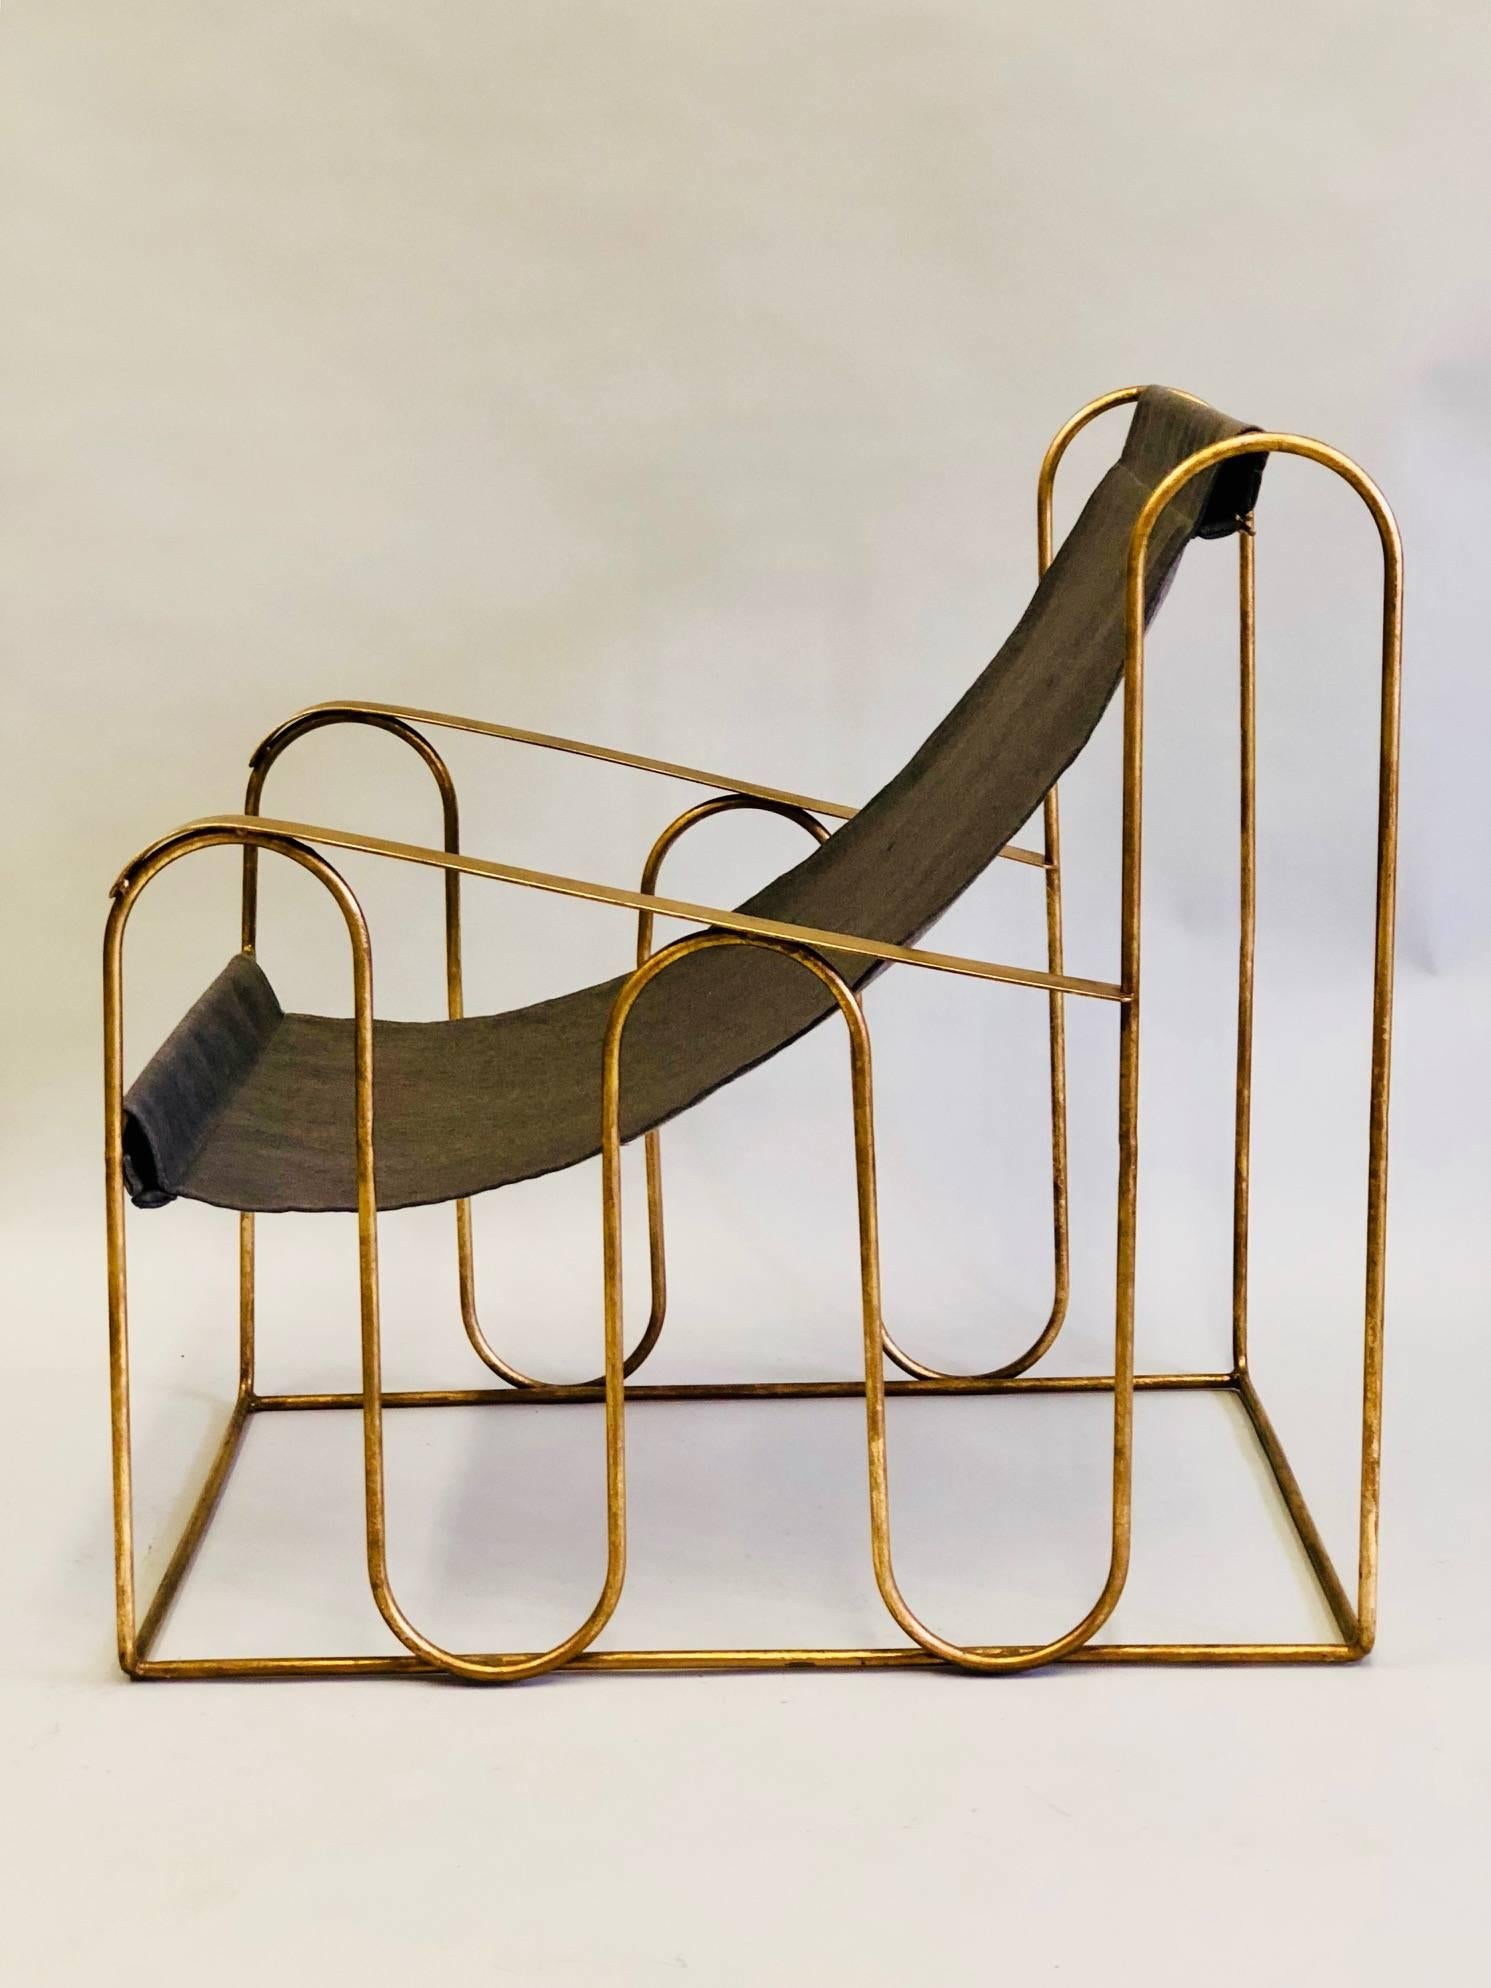 Elegant pair of French Mid-Century hand wrought iron armchairs or club chairs attributed to Jean Royere with a delicate undulating organic lines and a dramatic, open, modern, transparent sensibility. The chairs have been hand-gilt to a subtle